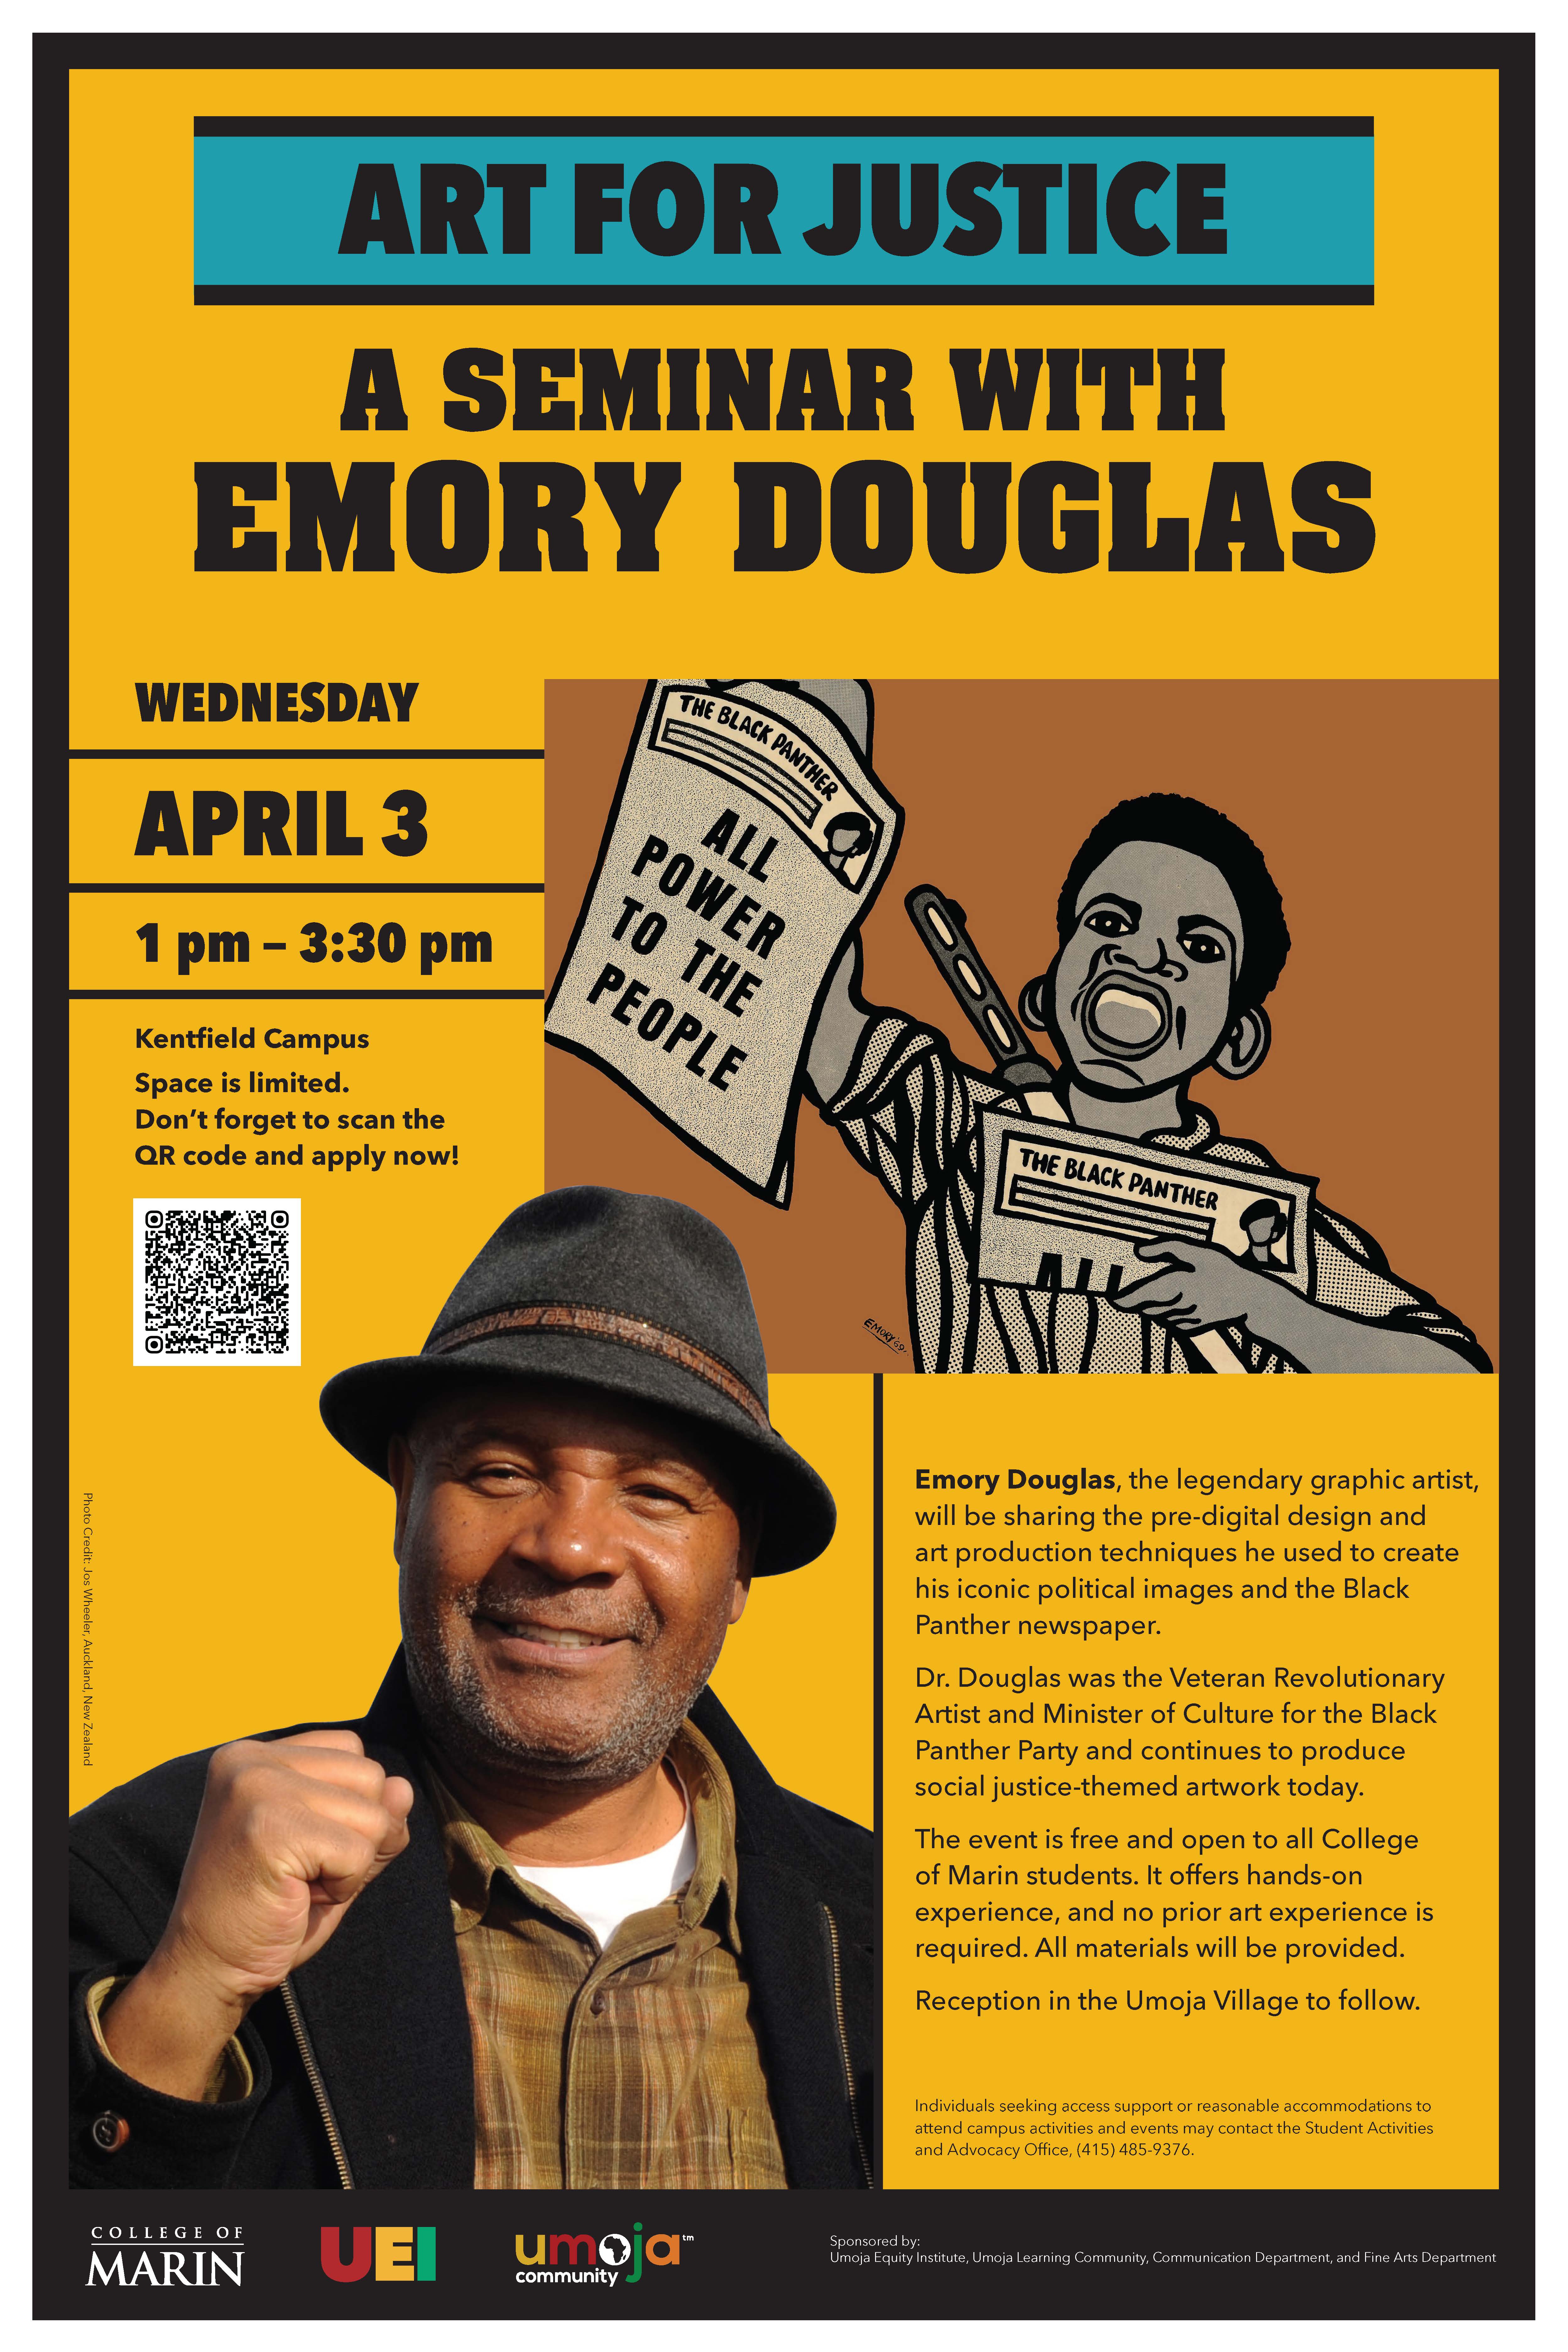 Poster with graphic artist Emory Douglas